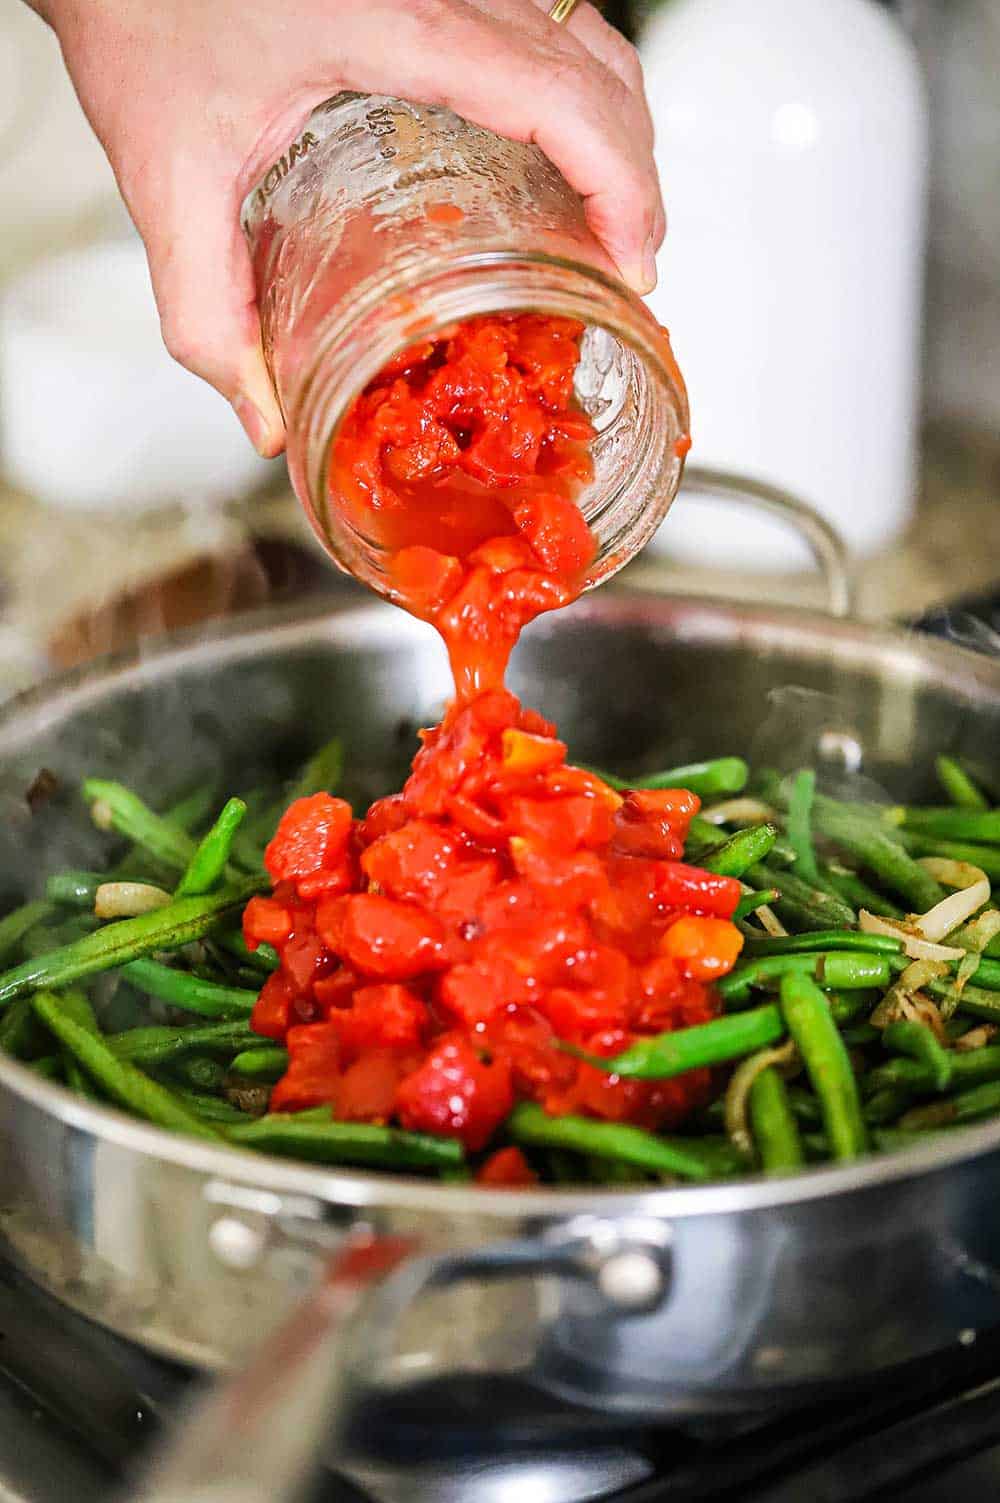 A person transferring diced tomatoes into a stainless steel skillet filled with sautéed green beans and onions.